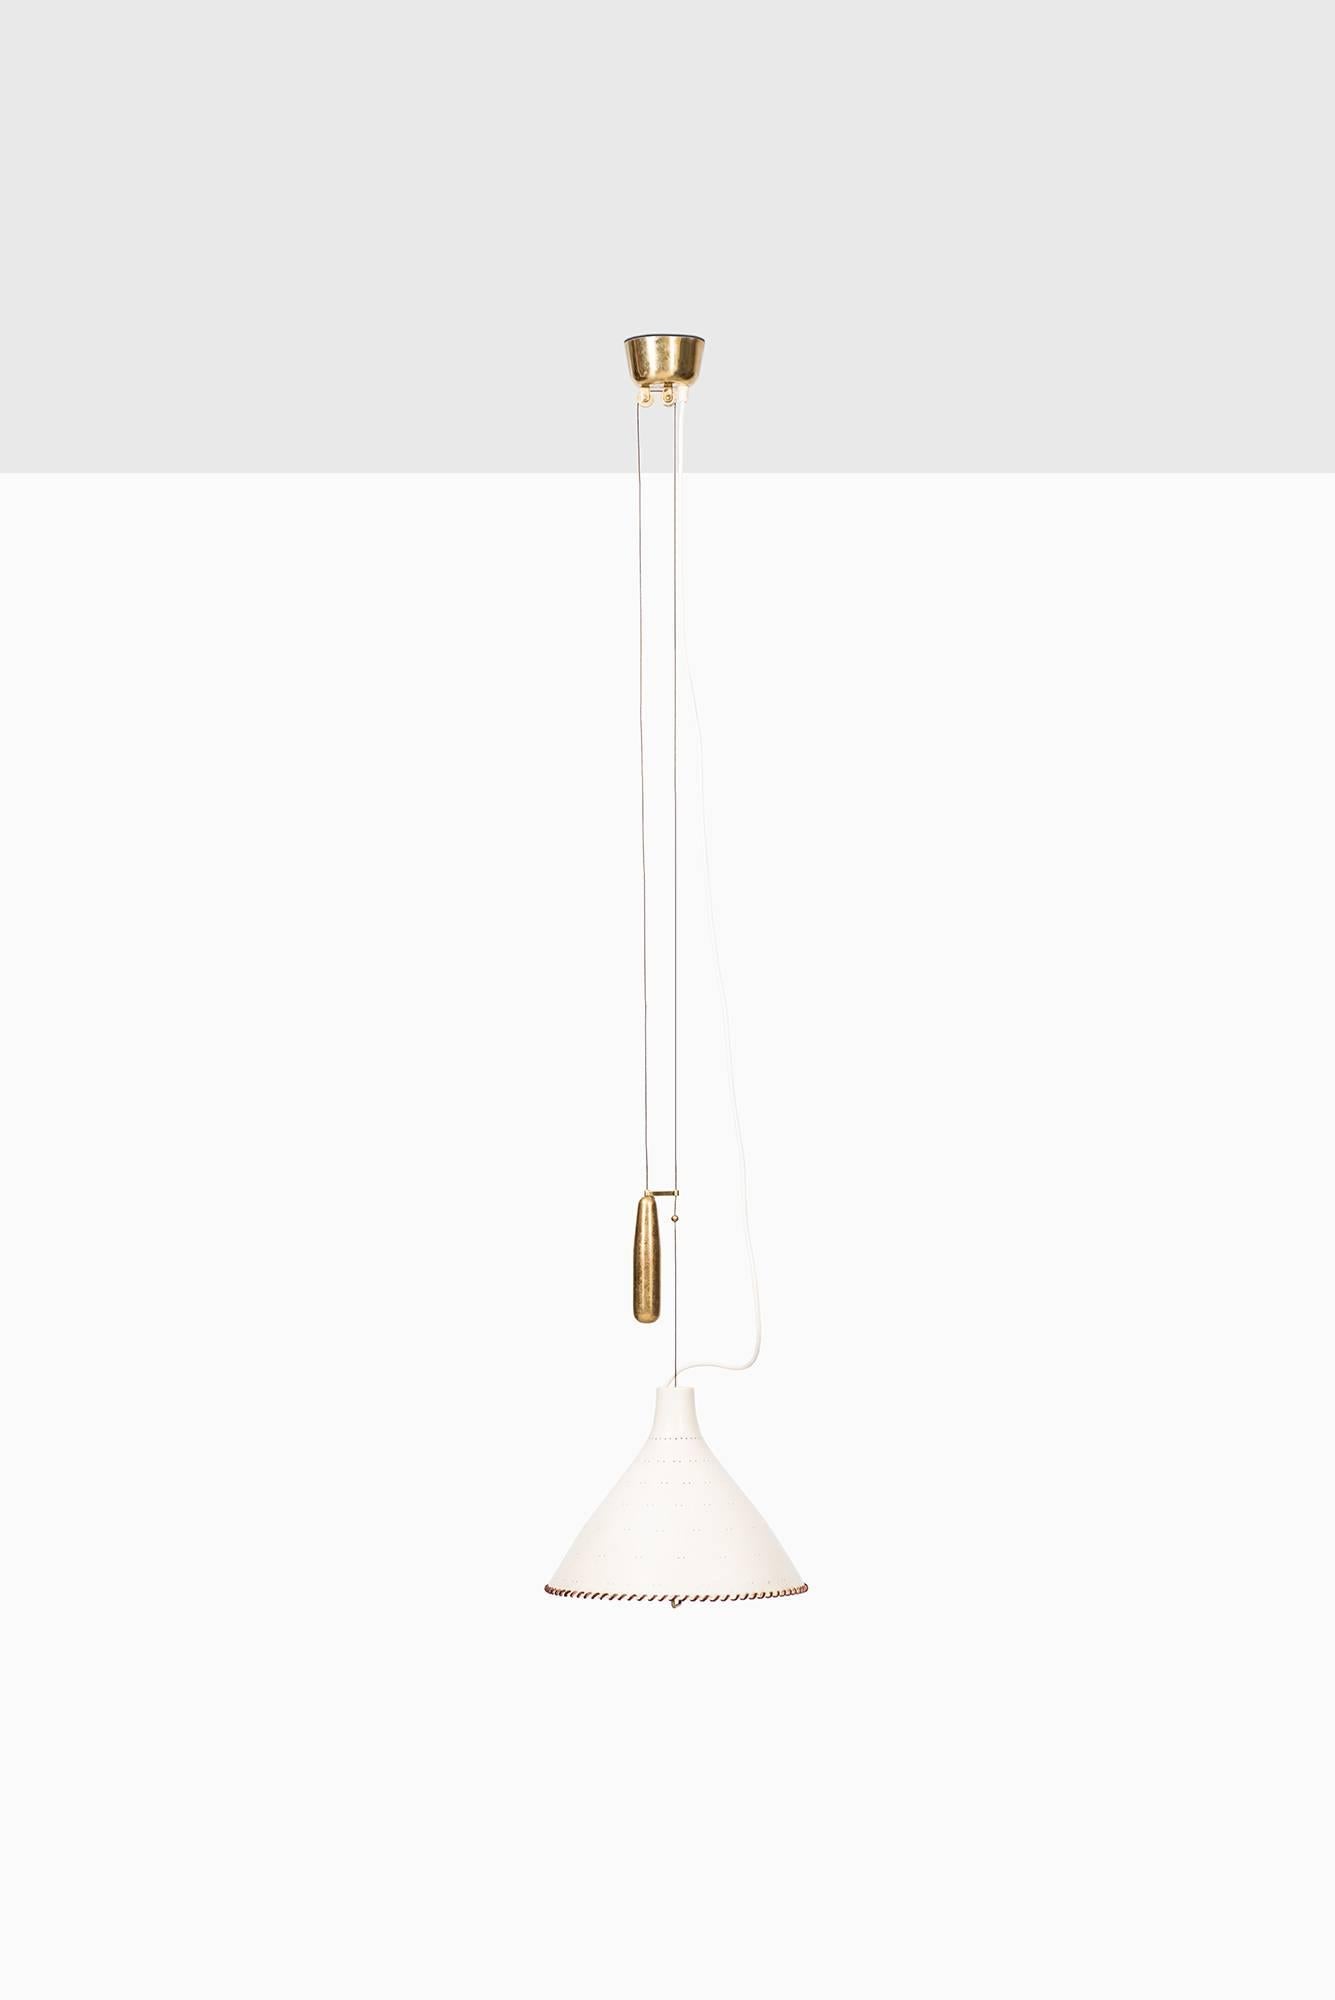 Rare height adjustable ceiling lamp model A1982N designed by Paavo Tynell. Produced by Idman in Finland.